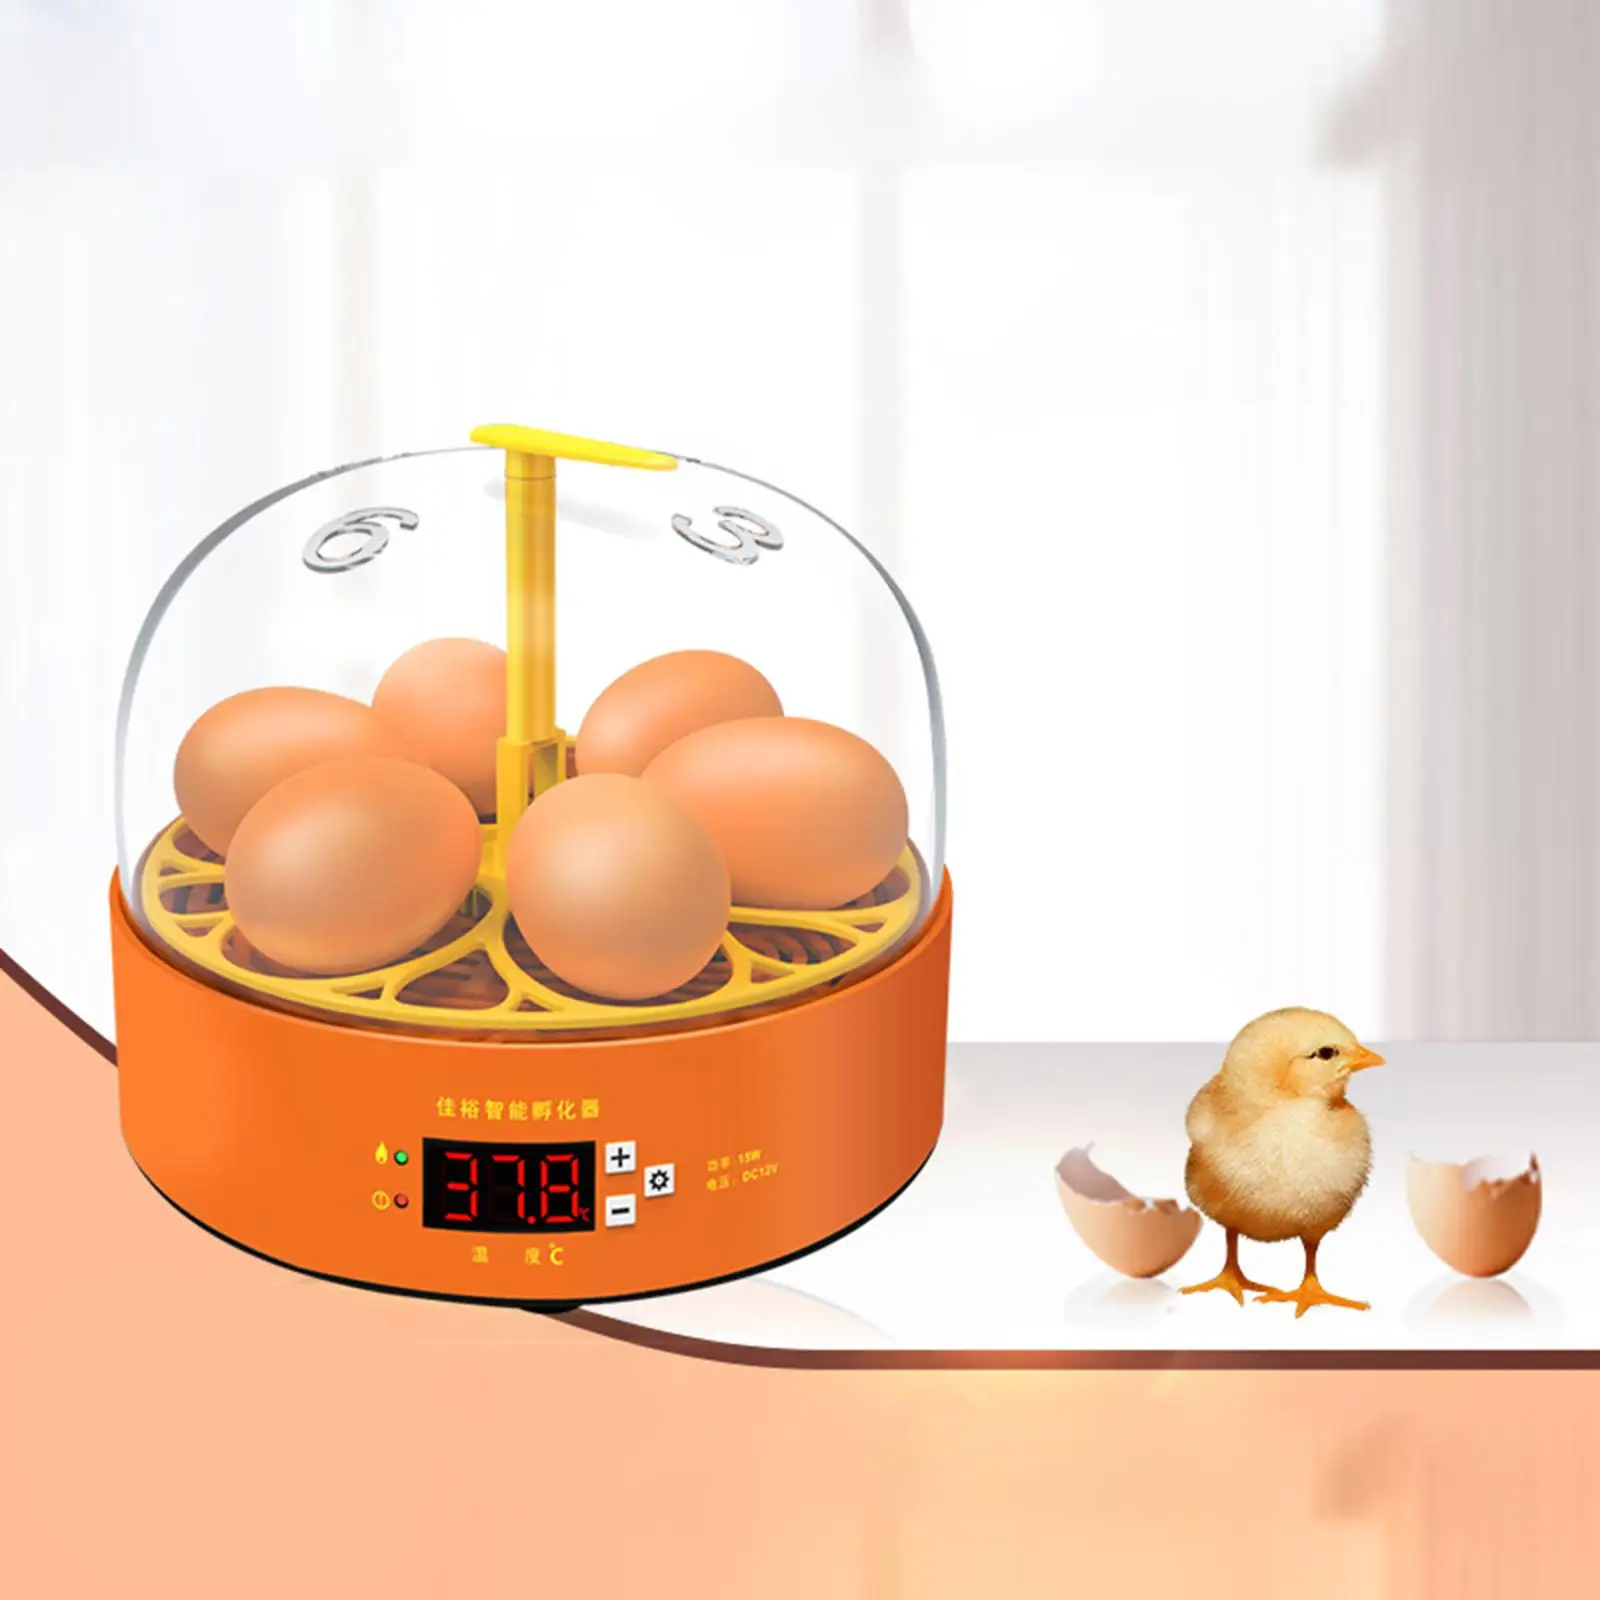 6 Eggs High Hatching Rate Equipment Fully Automatic Incubator Automatic Hatchery Brooder Chicken Incubator Quail Brooder